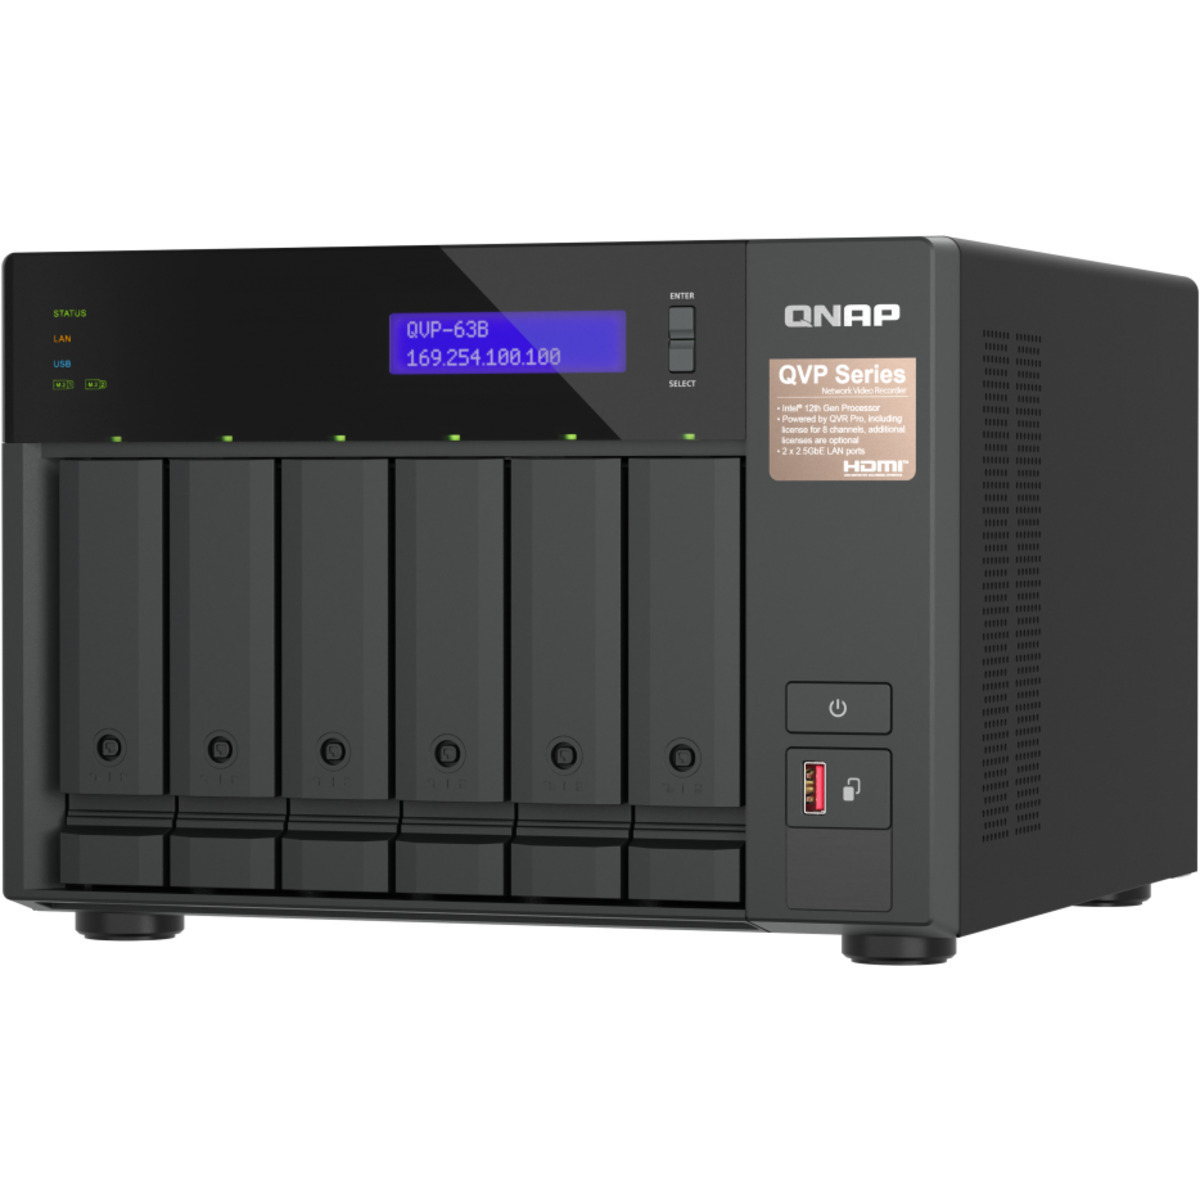 buy QNAP QVP-63B 24tb Desktop NVR - Network Video Recorder 6x4000gb Toshiba MN Series MN08ADA400E 3.5 7200rpm SATA 6Gb/s HDD NAS Class Drives Installed - Burn-In Tested - ON SALE - nas headquarters buy network attached storage server device das new raid-5 free shipping simply usa QVP-63B